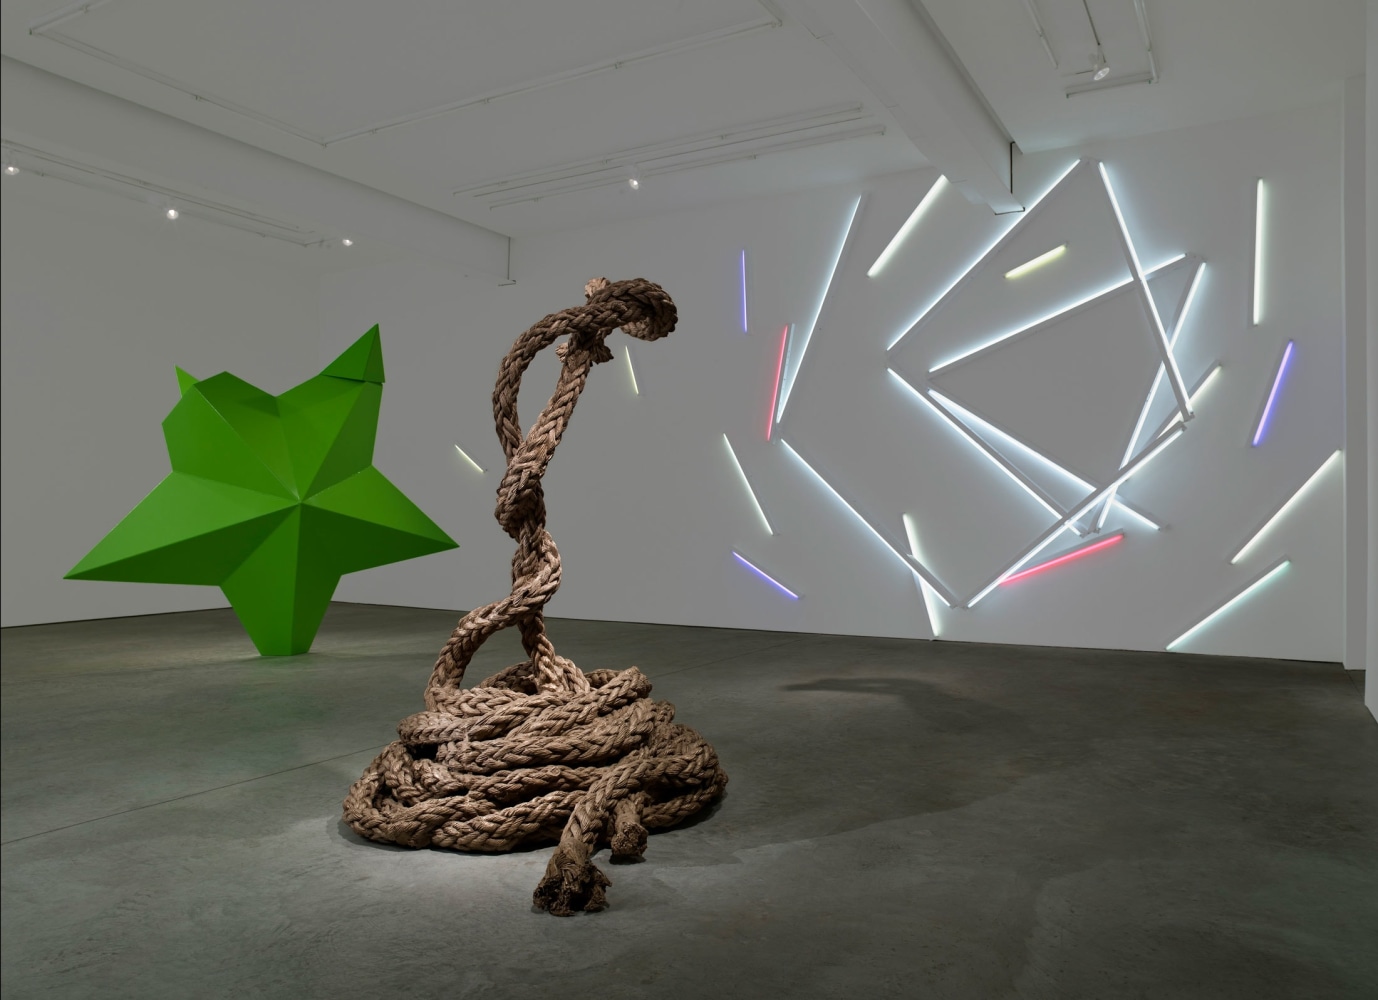 Mark Handforth
(From left to right)
Big Green Star, 2008, Steel polyurethane paint, 132 x 52 x 109 inches (335.3 x 132.1 x 276.9 cm)
RopeSnakes, 2008, Cast bronze, 96 x 60 x 90.5 inches (243.8 x 152.4 x 229.9 cm)
Tumbleweed, 2008, Fluorescent light and fixtures, 485 x 11 x 180 inches (1231.9 x 27.9 x 457.2 cm)

Installation view, Gavin Brown&amp;#39;s Enterprise, New York, March 1 &amp;ndash; March 29, 2008